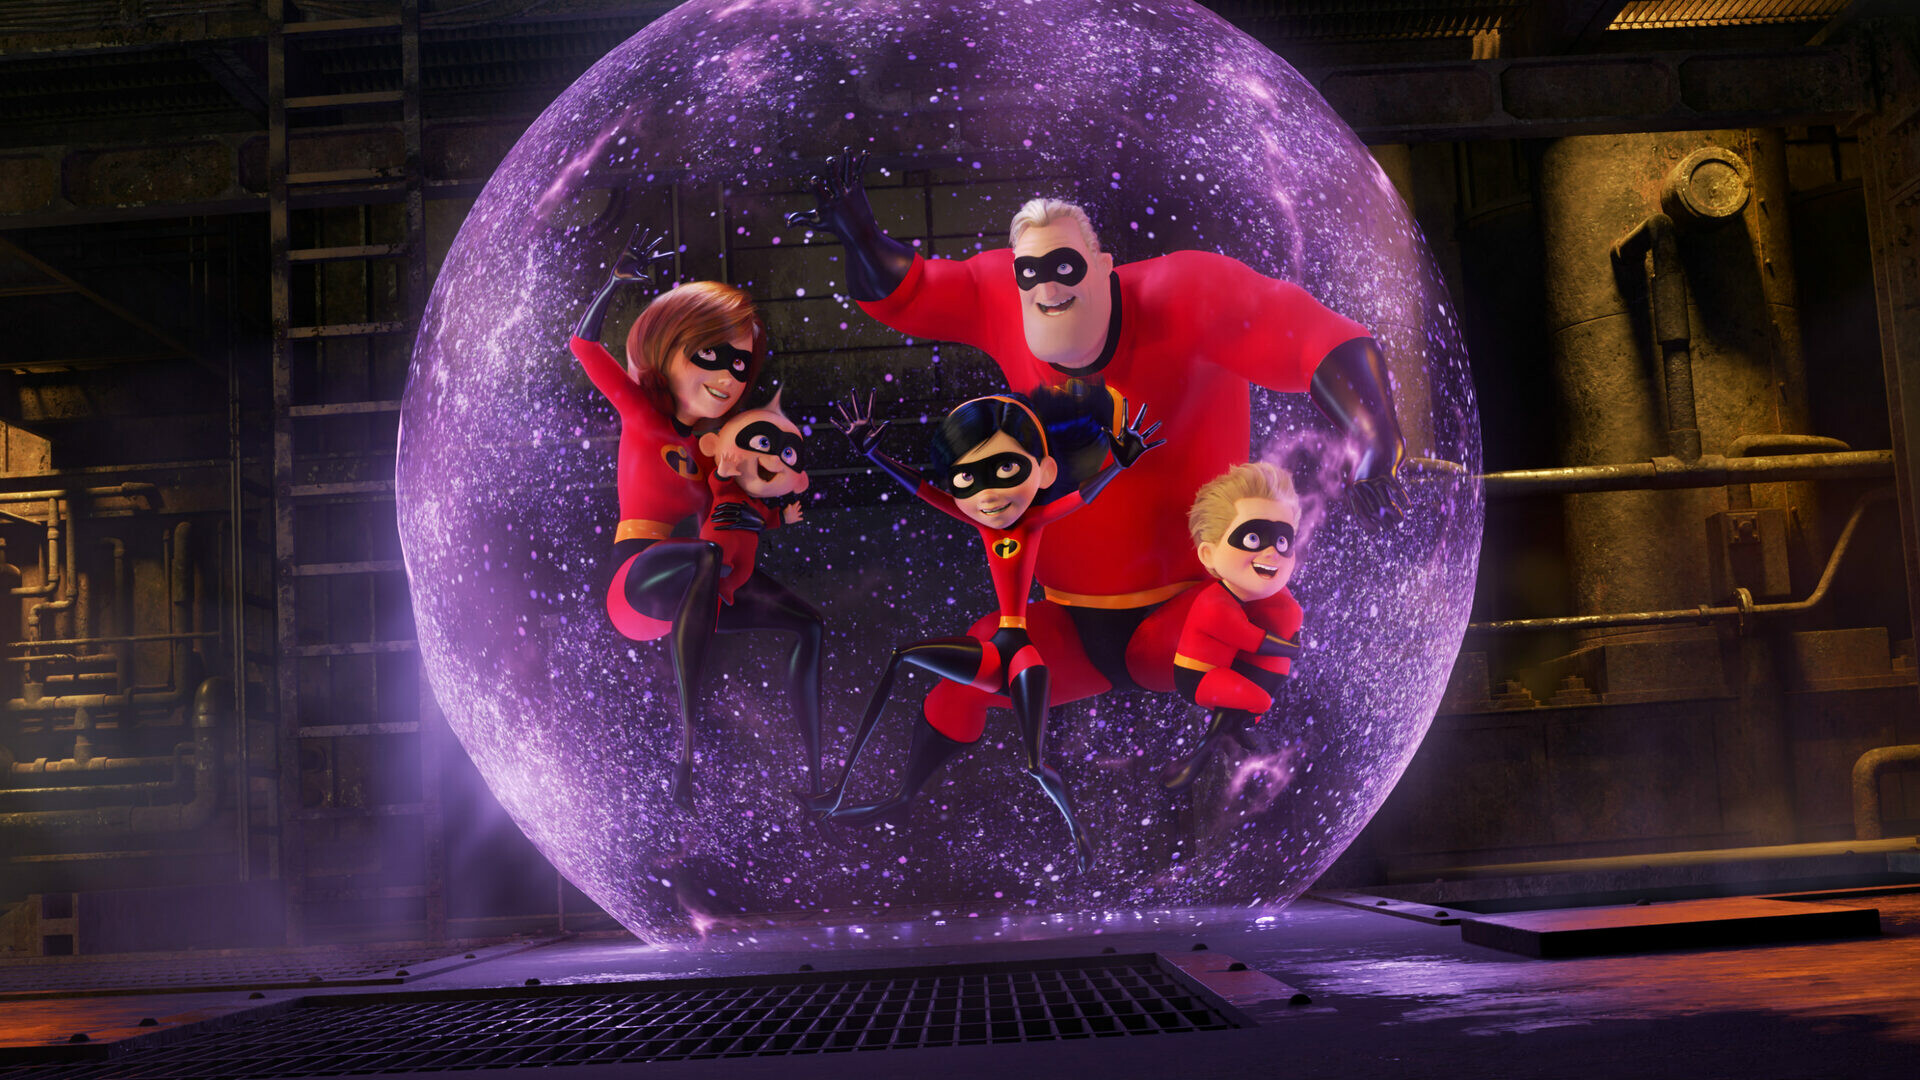 The Incredibles: Two Academy Awards for Best Animated Feature and Best Sound Editing with two additional nominations for Best Original Screenplay and Best Sound Mixing. 1920x1080 Full HD Background.